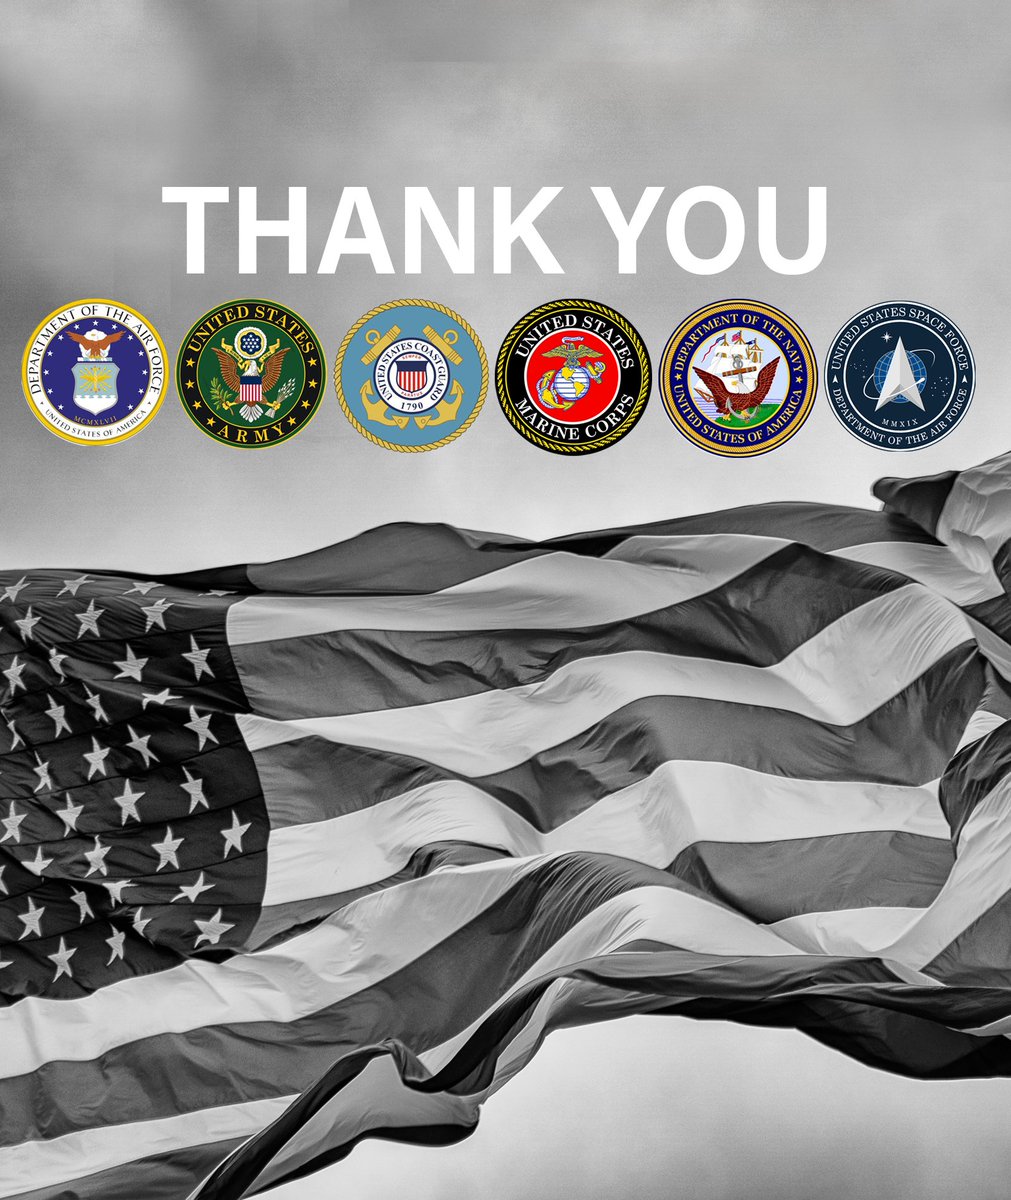 Tomorrow is Armed Forces Day and we want to recognize all the brave men and women who serve our country! Thank you for all of your sacrifices. 

#FisherHouse #military #militaryfamily #homeawayfromhome